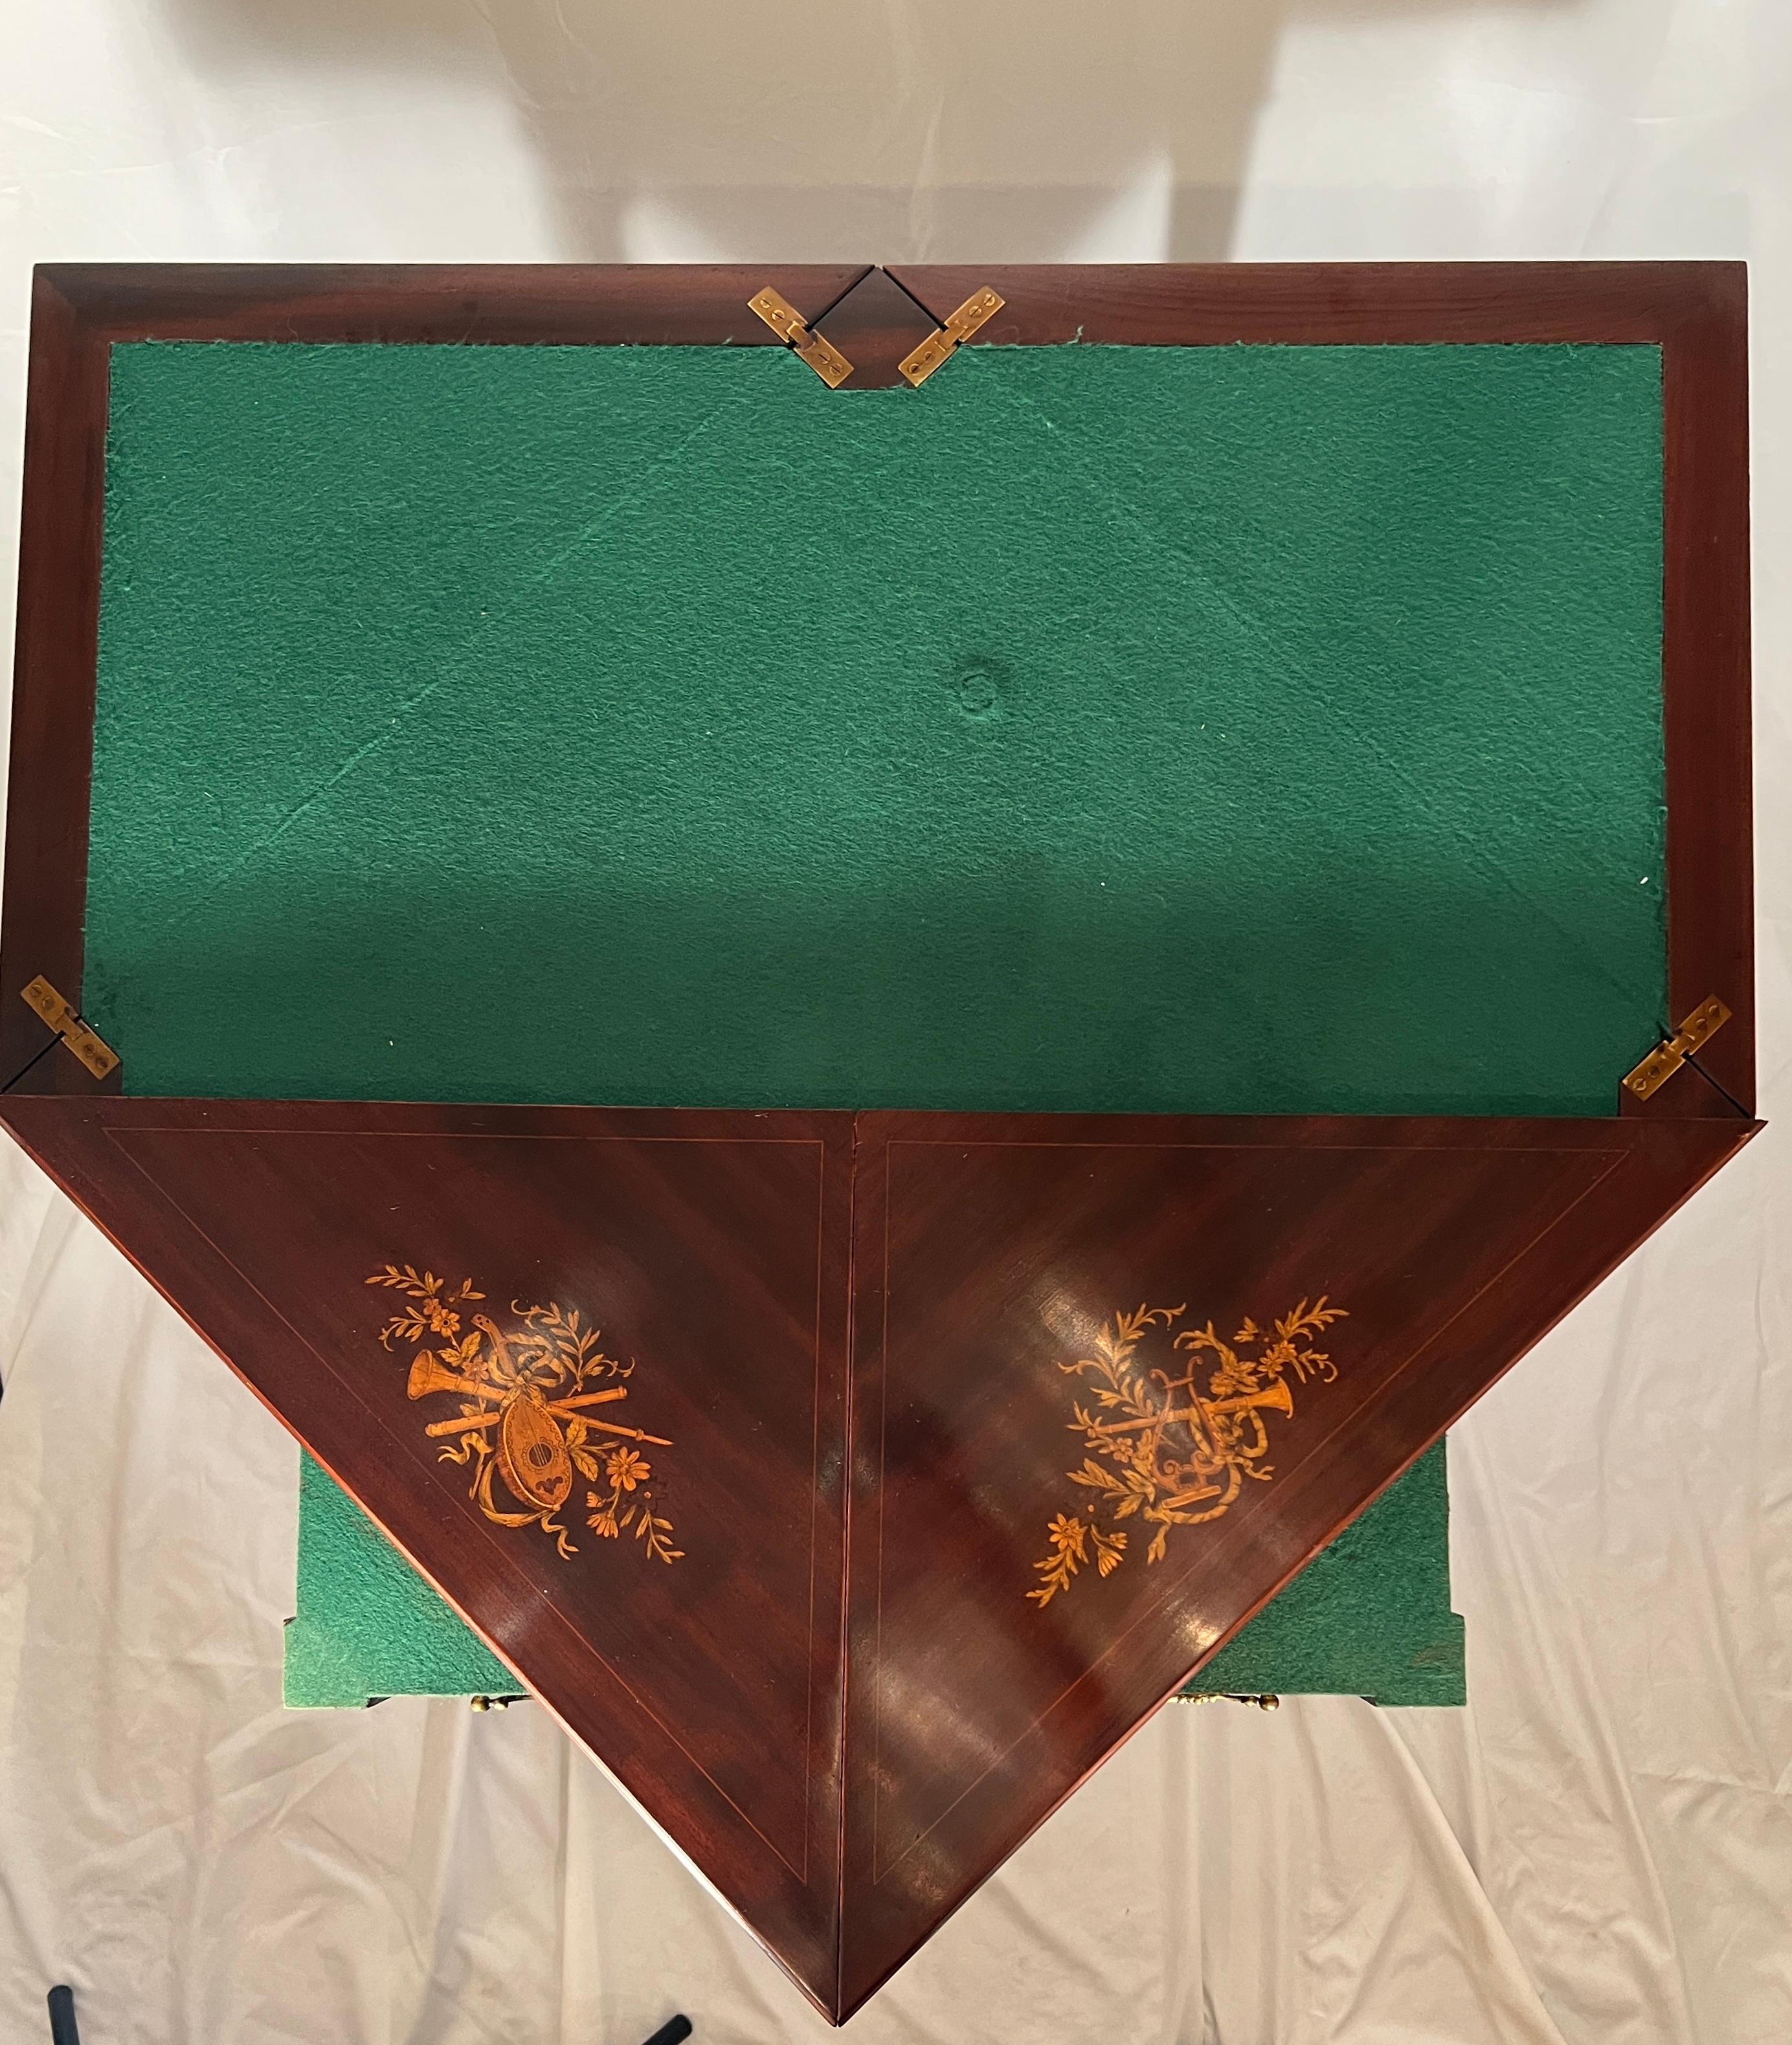 Antique English Mahogany Handkerchief Game Table circa 1880 In Good Condition For Sale In New Orleans, LA